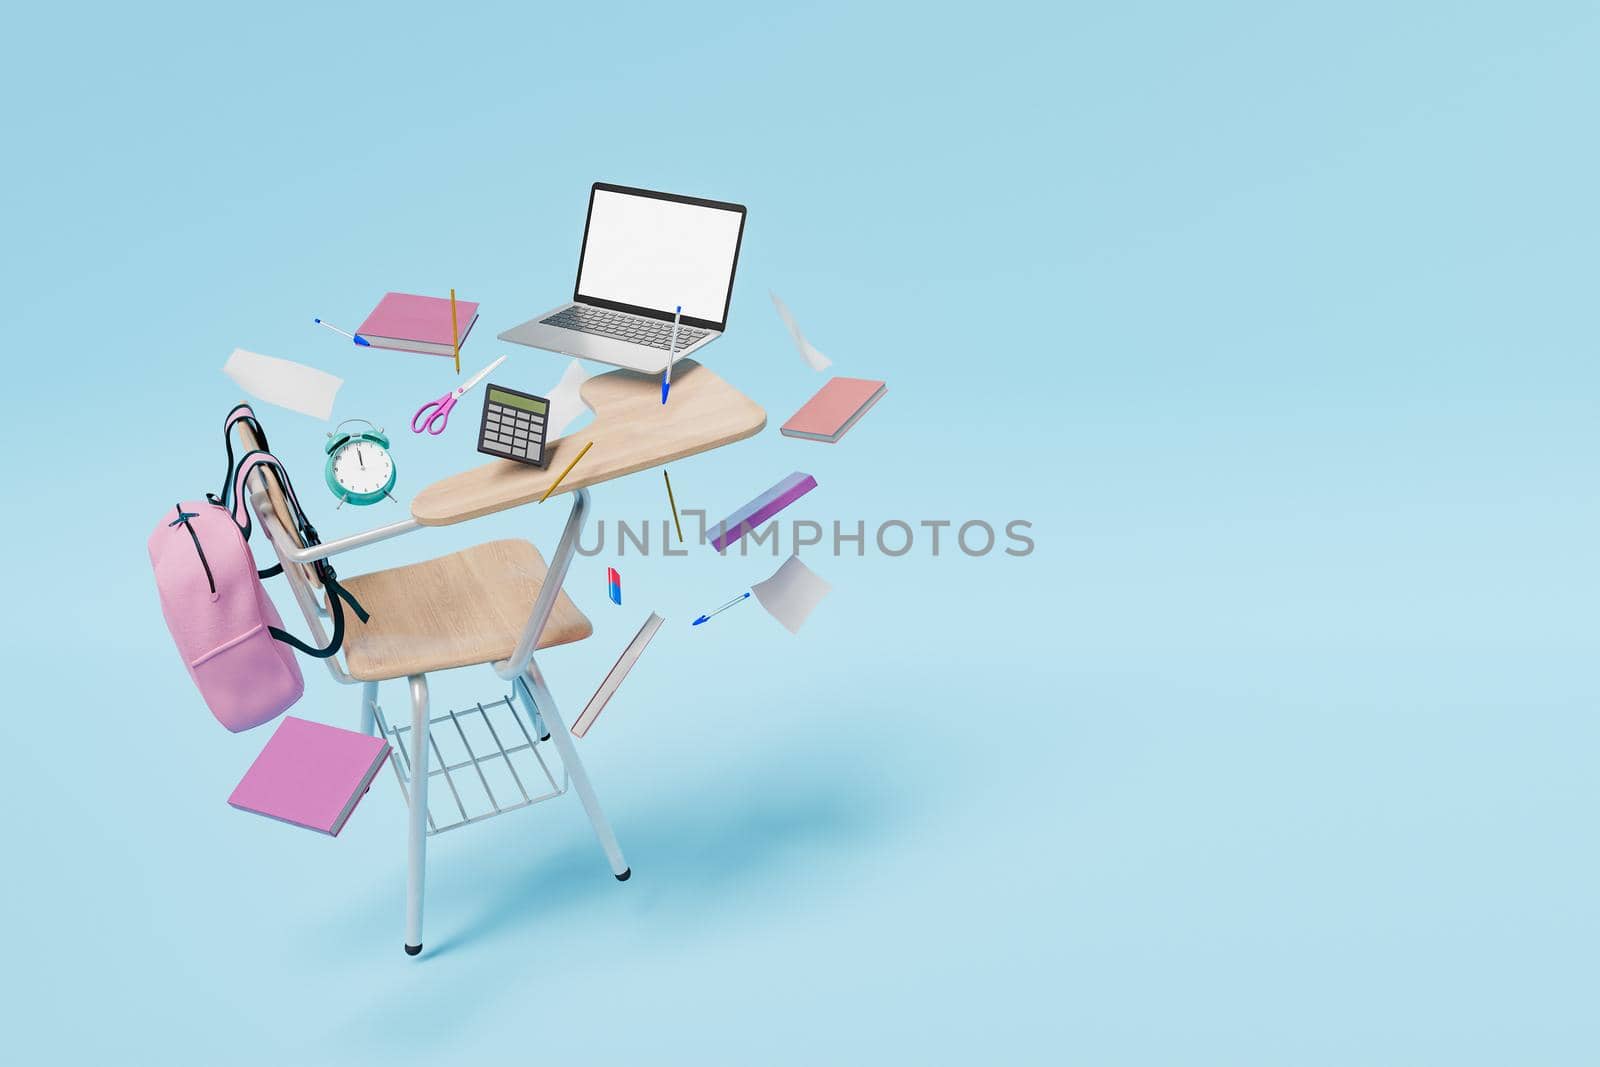 3D illustration of tilted school desk with flying stationery and netbook with blank screen against blue background